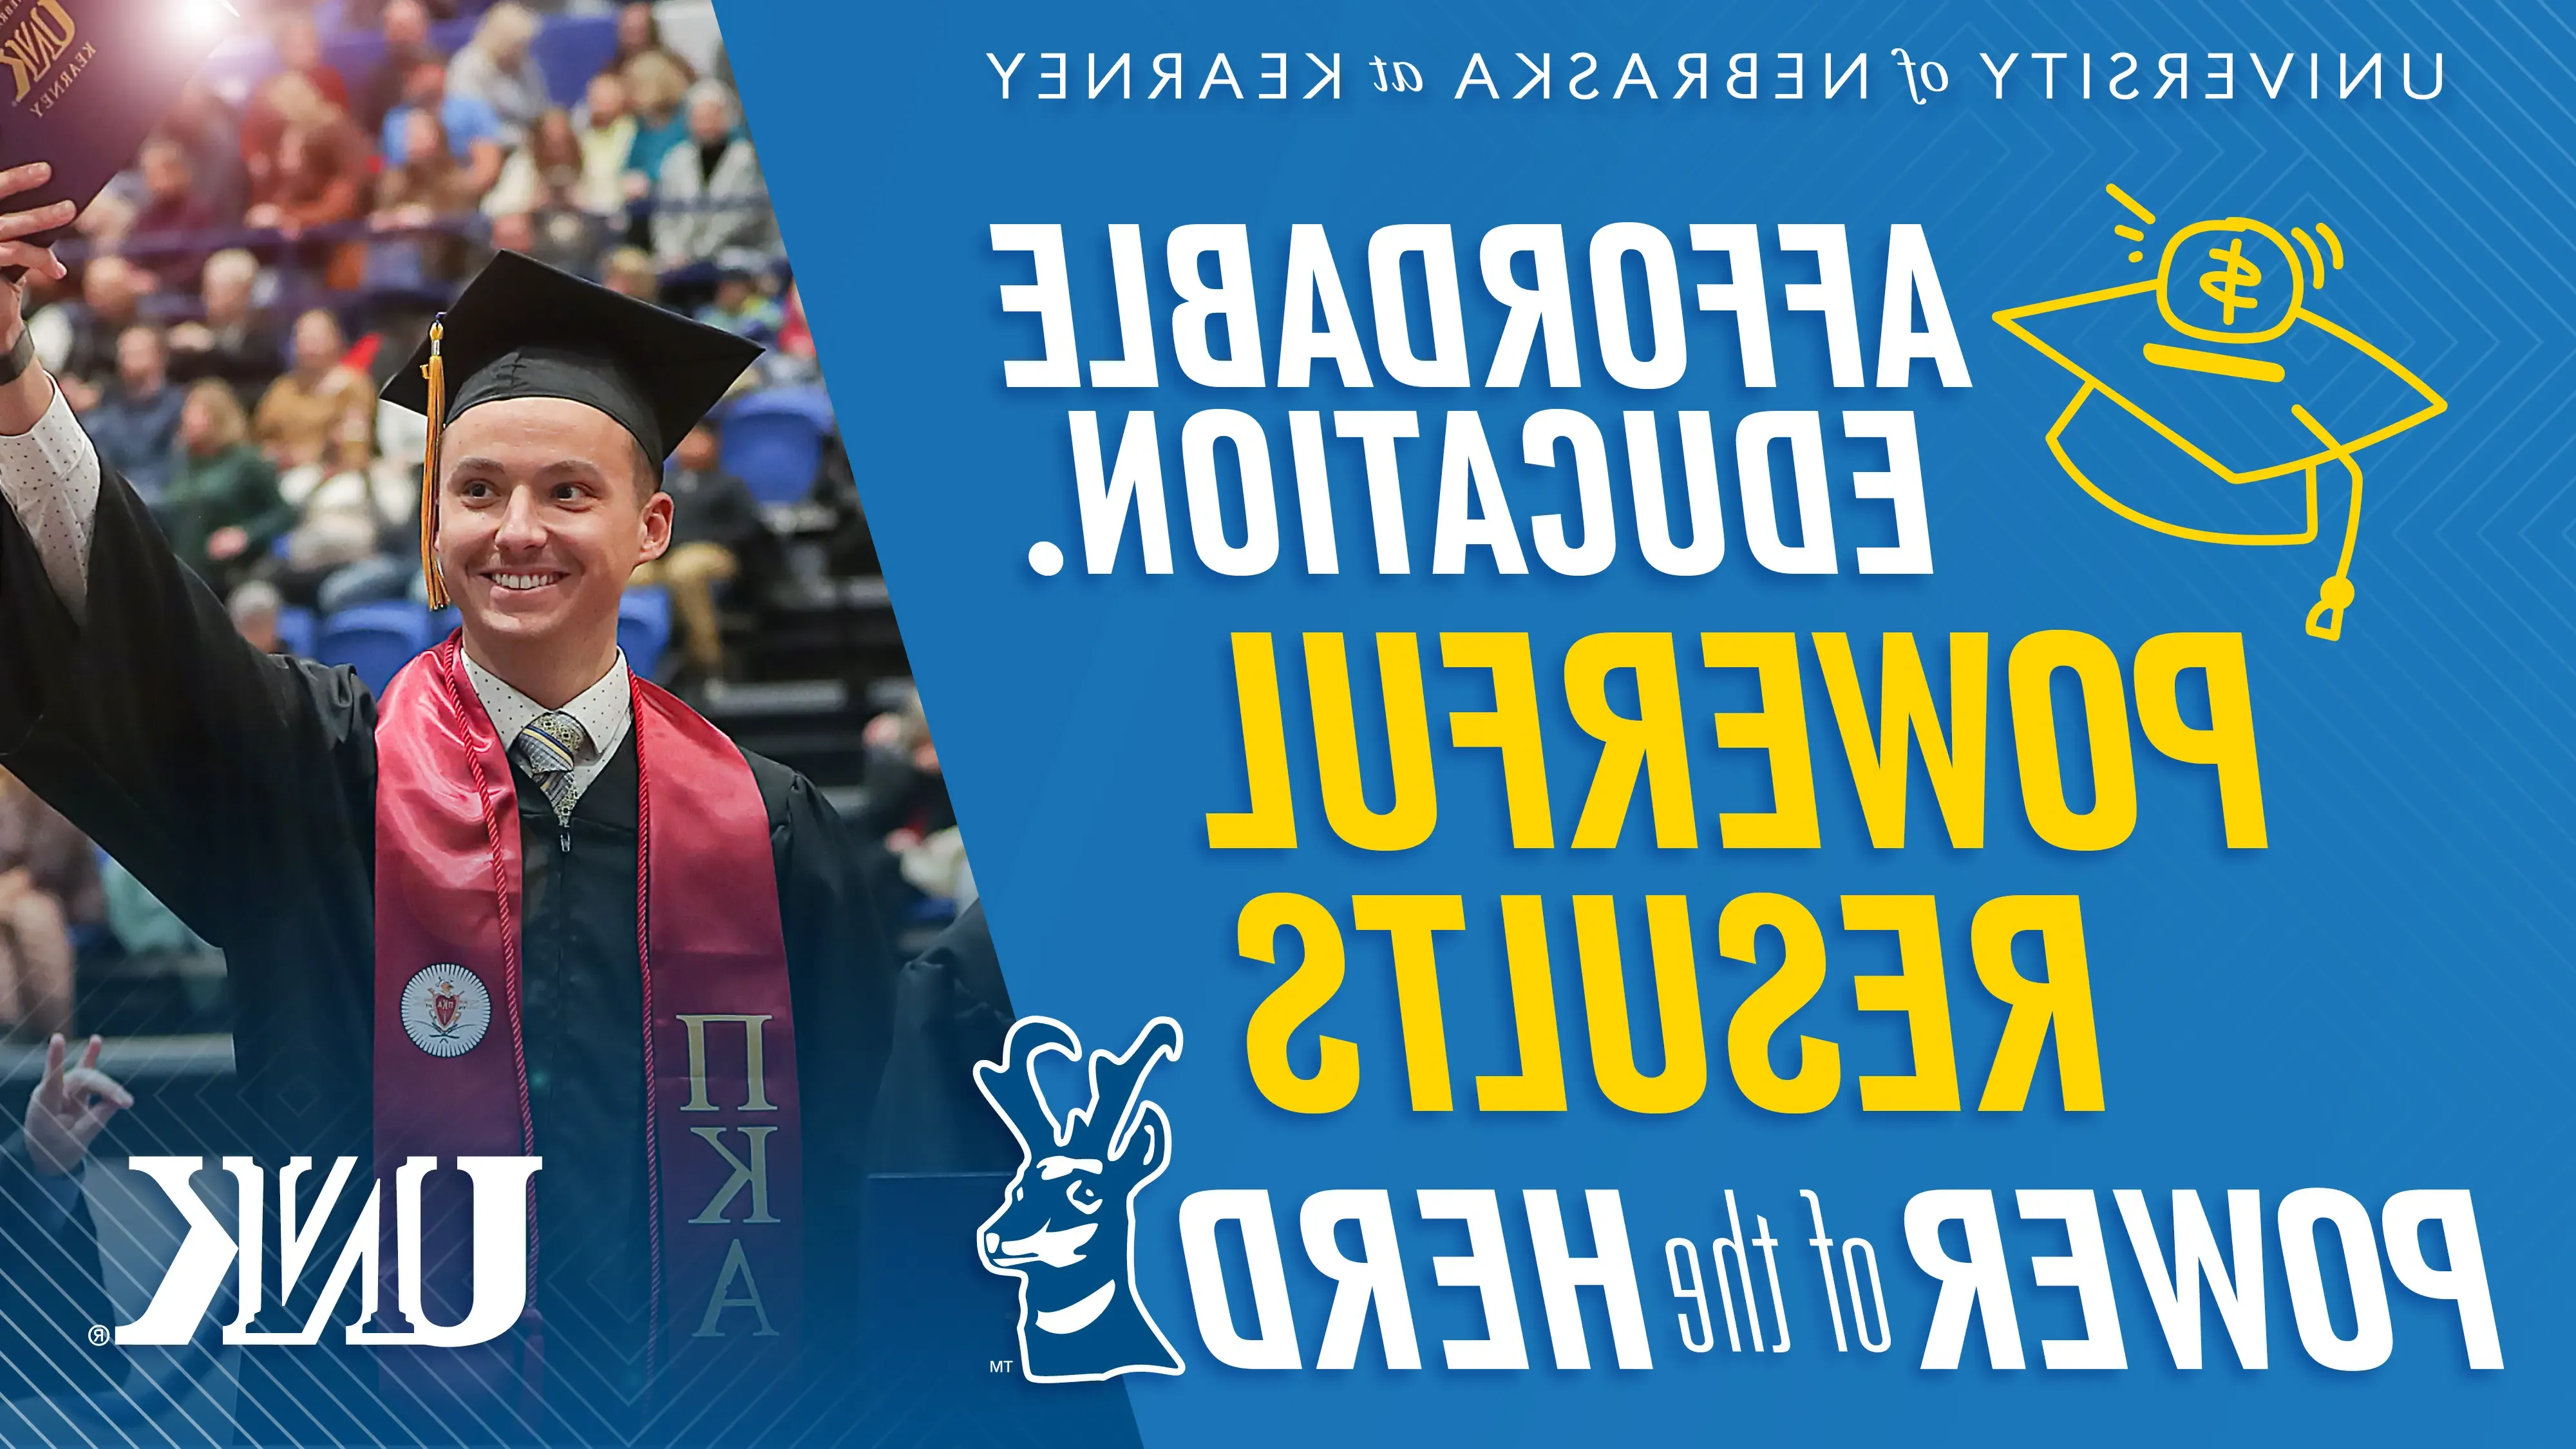 advertisement sample showing a man graduating with the words affordable education powerful results 群体的力量